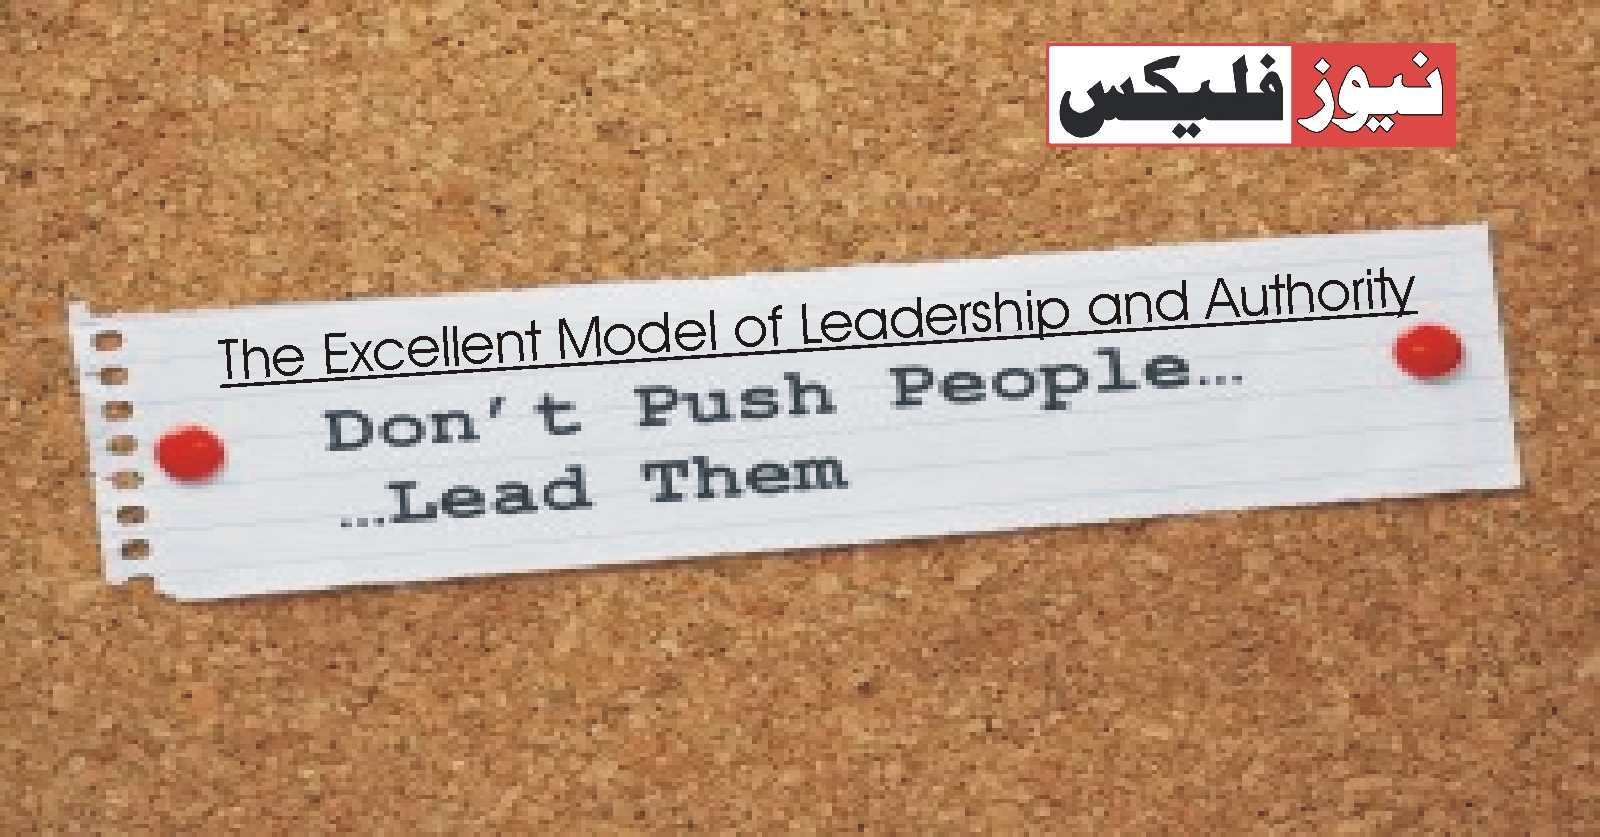 The Excellent Model of Leadership and Authority